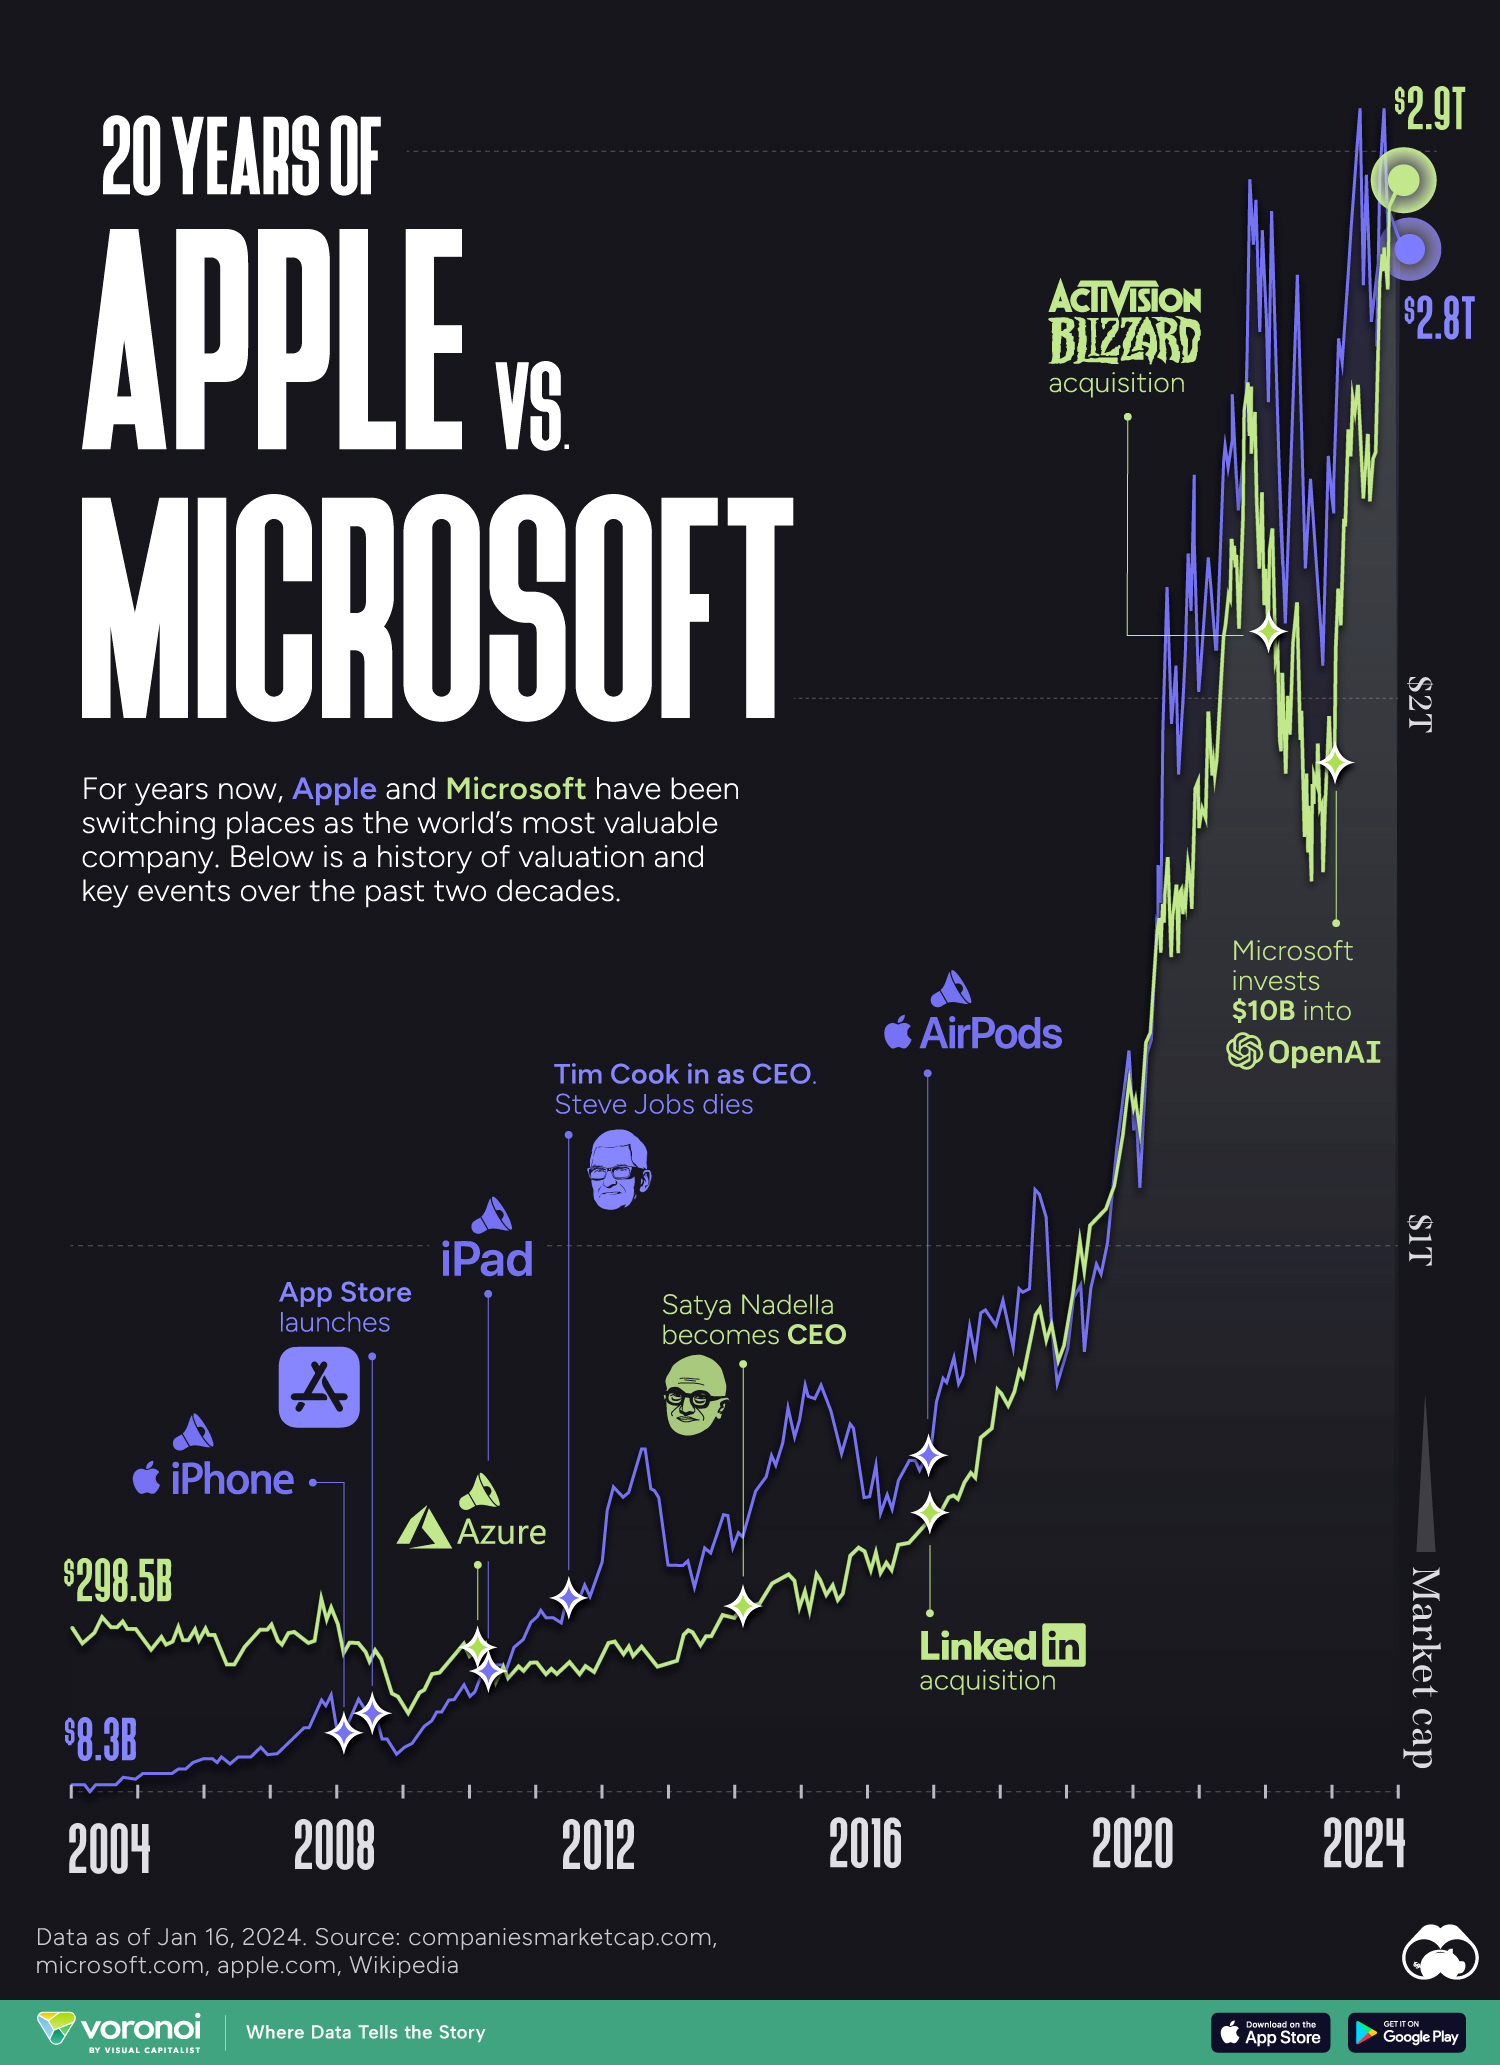 Line chart illustrating the fluctuation of Apple vs Microsoft as the world’s most valuable company over the years.